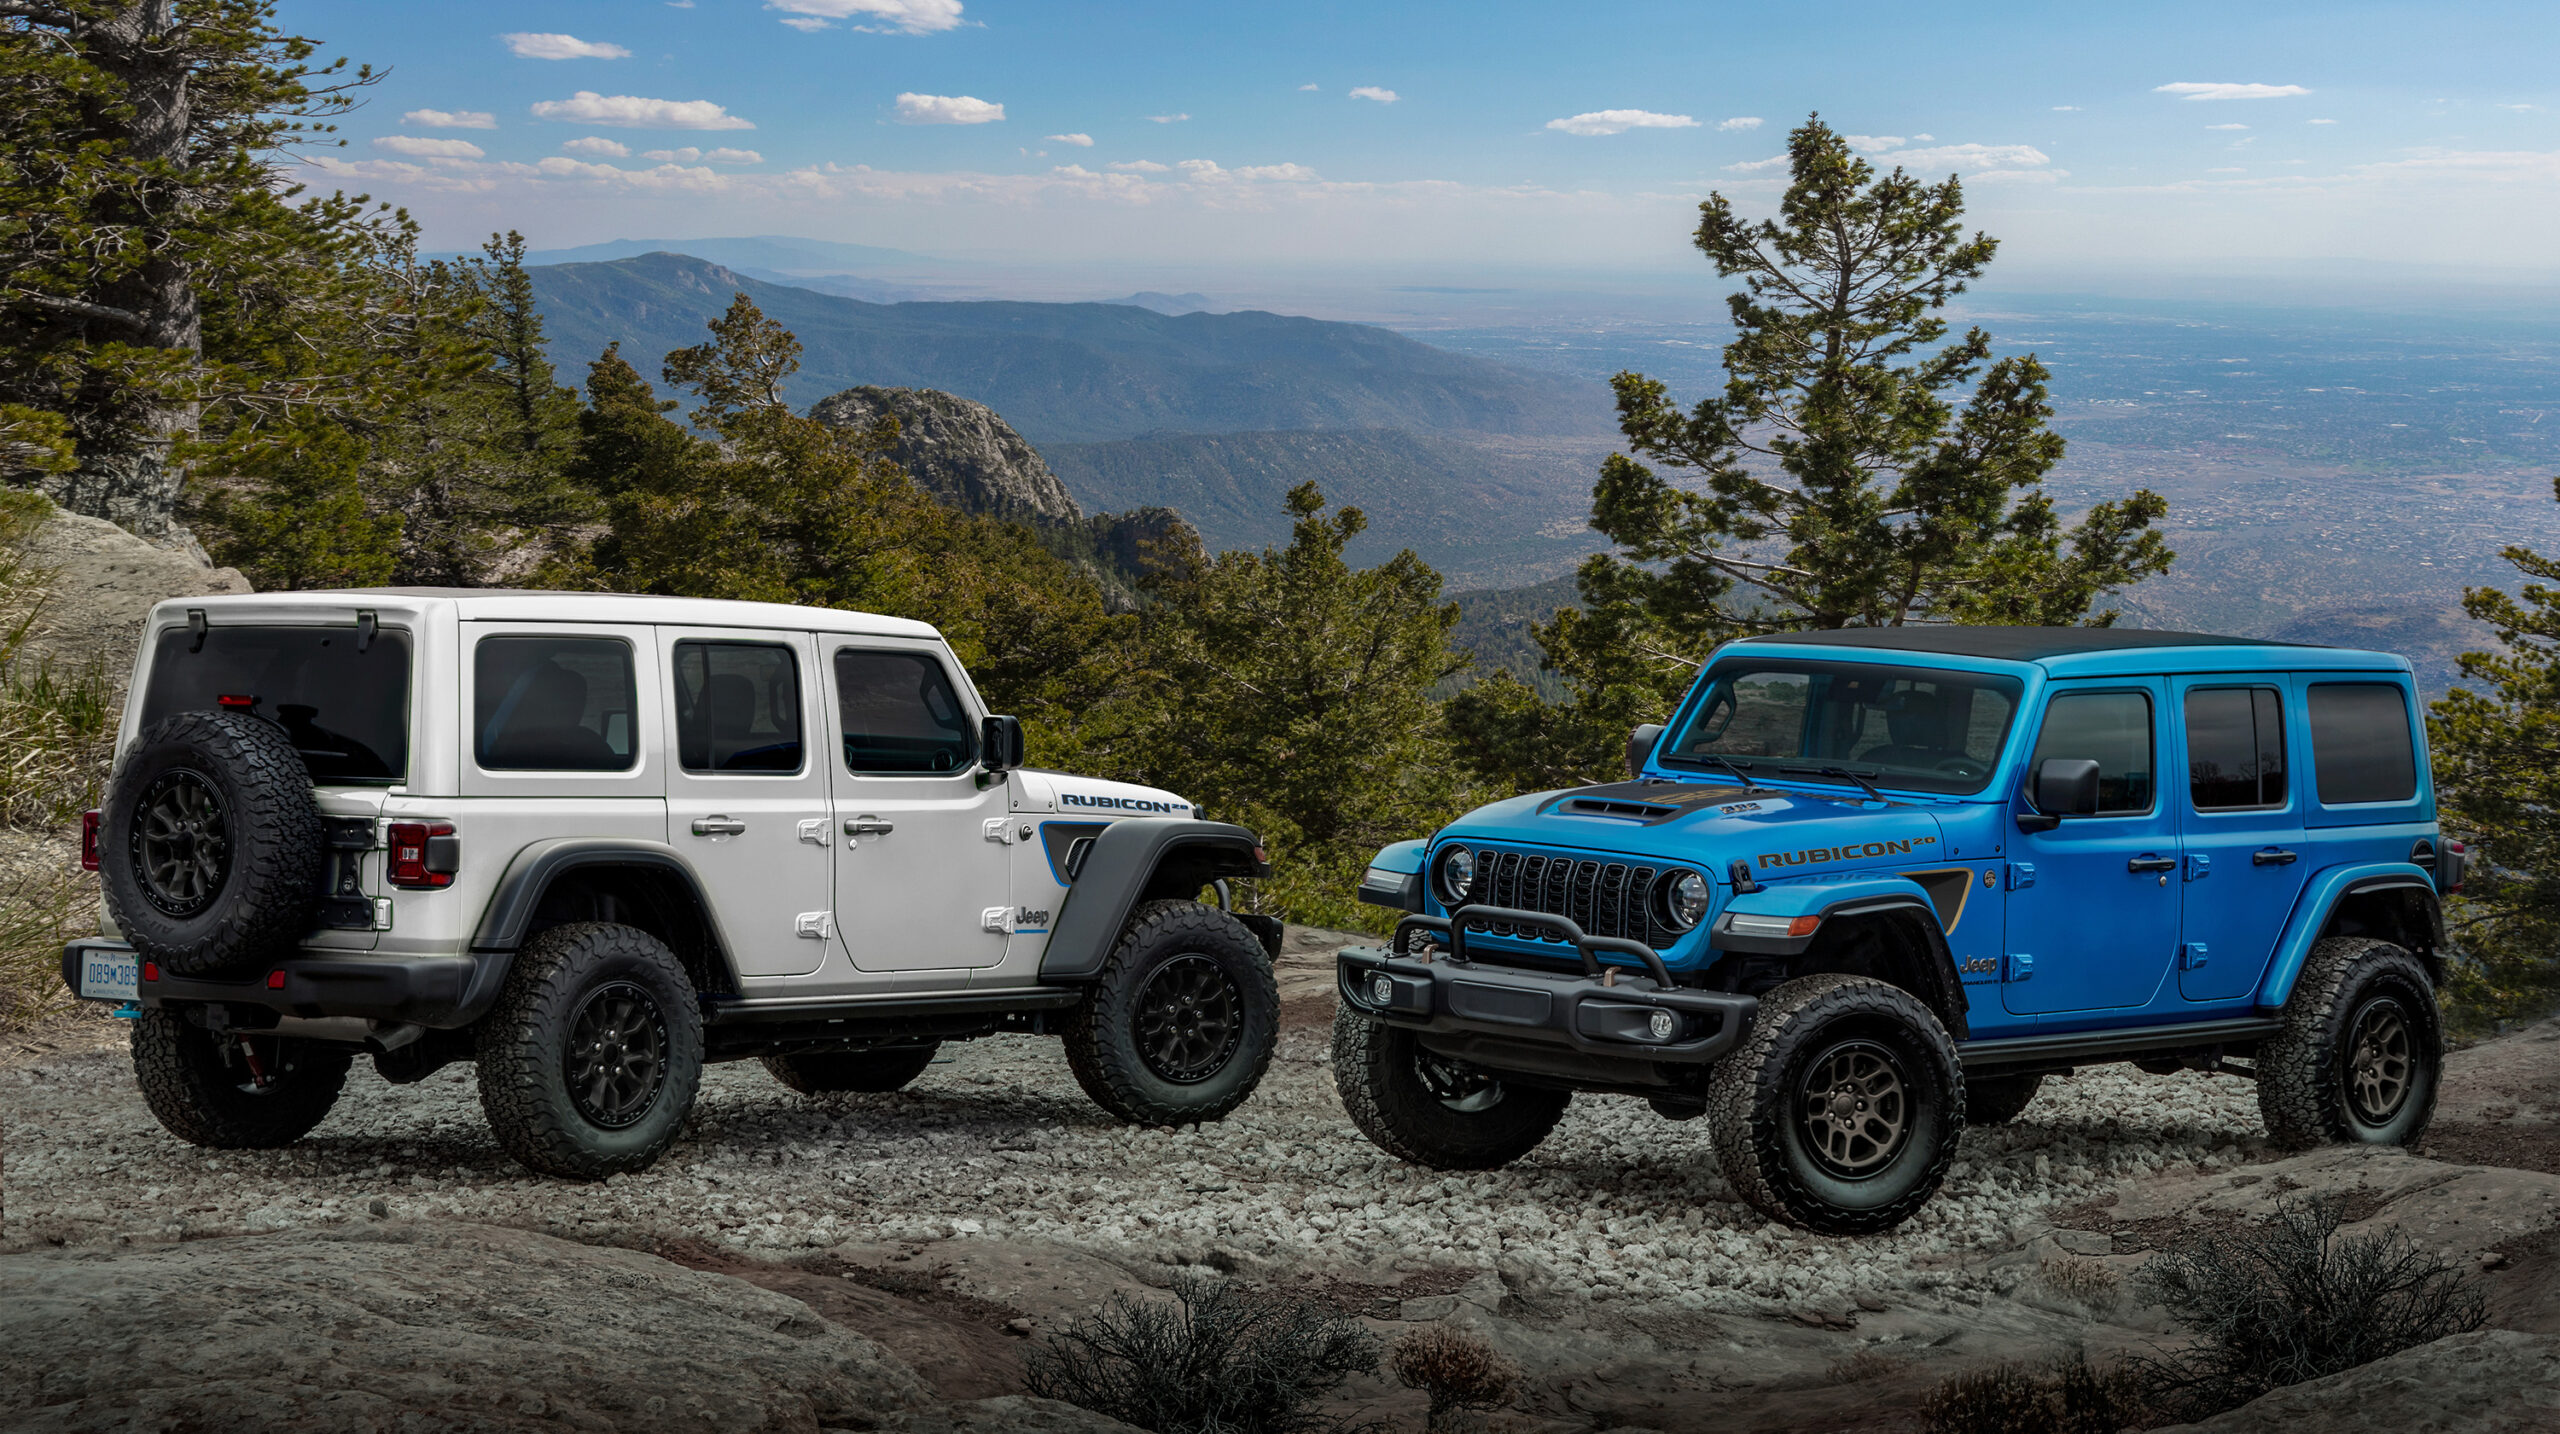 Jeep Celebrating Rubicon Anniversary with Special Edition Models | THE SHOP